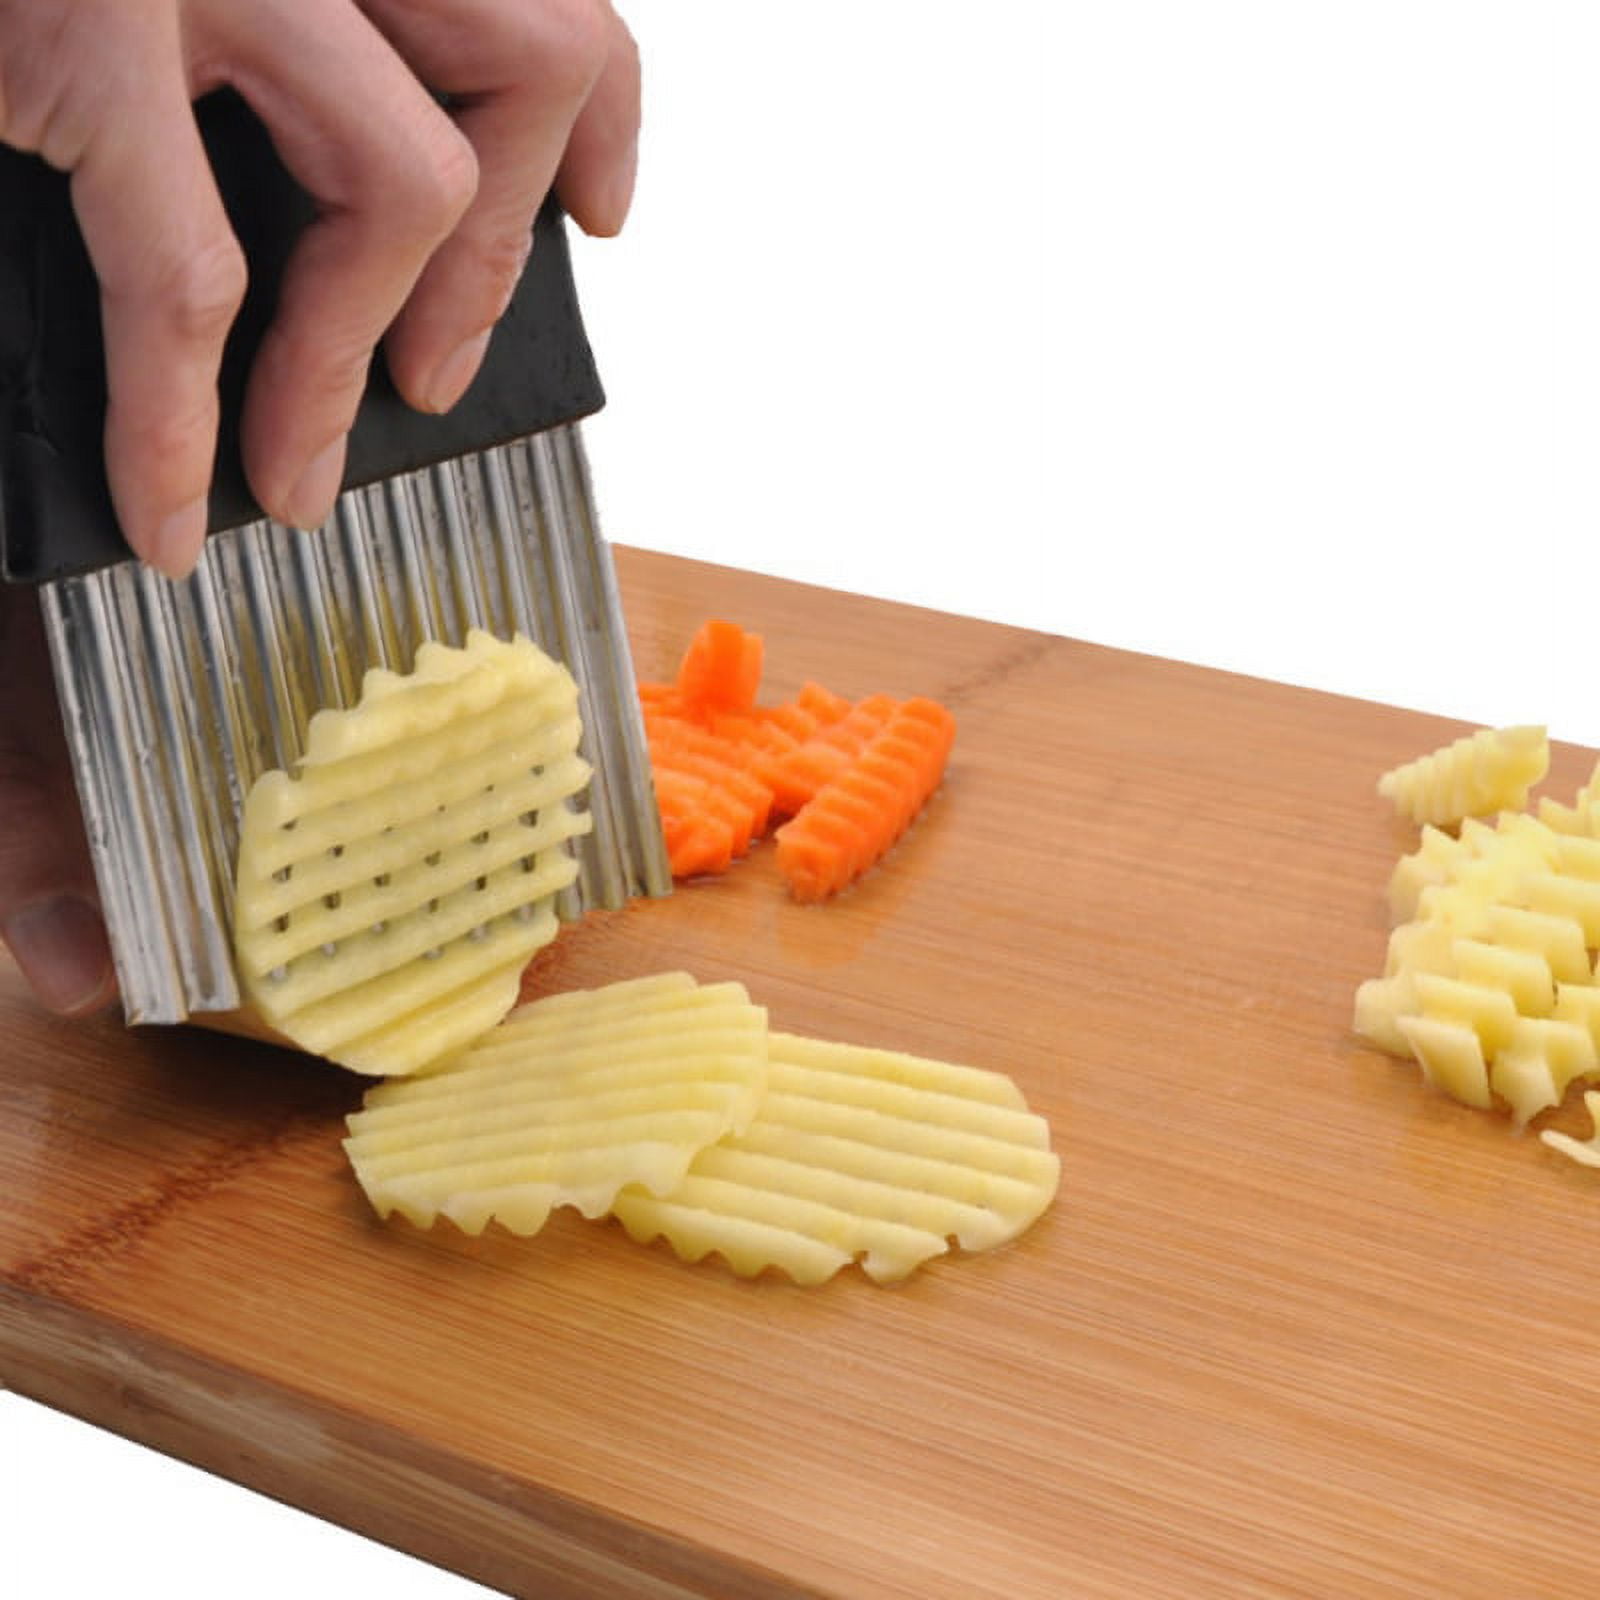 Premium Wavy Potato Cutter - Vegetable & Fruit Crinkle Cutting Tool, French  Fry Cutter, Serrated Salad Chopping Knife French Fry Slicer, Black Blade